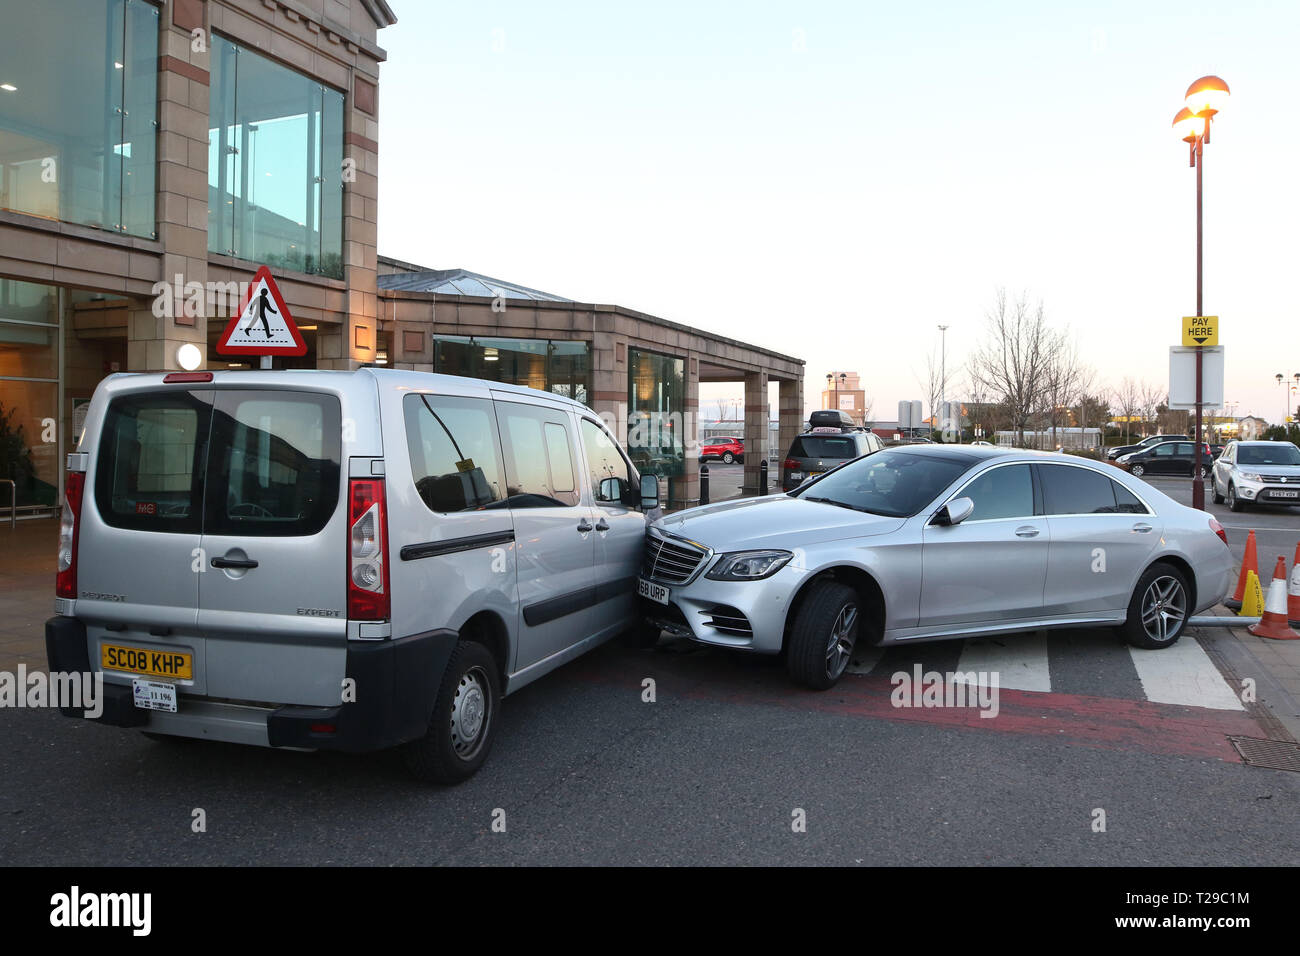 Inverness, UK. 31st Mar, 2019. 31 March 2019: Scene of a road traffic collision at the entrance to Morrisons supermarket in Inverness. A silver Mercedes was in collision with a silver Peugeot taxi. The driver of the taxi said that the 45-year-old driver of the automatic Mercedes, who had a New York State driving licence registered to a New York address, was attempting to park in a disabled bay when the car suddenly went forward across a pedestrian area, knocked down a parking ticket machine which became trapped under the car, and then crossed the zebra crossing and hit the taxi. Picture: Andre Stock Photo